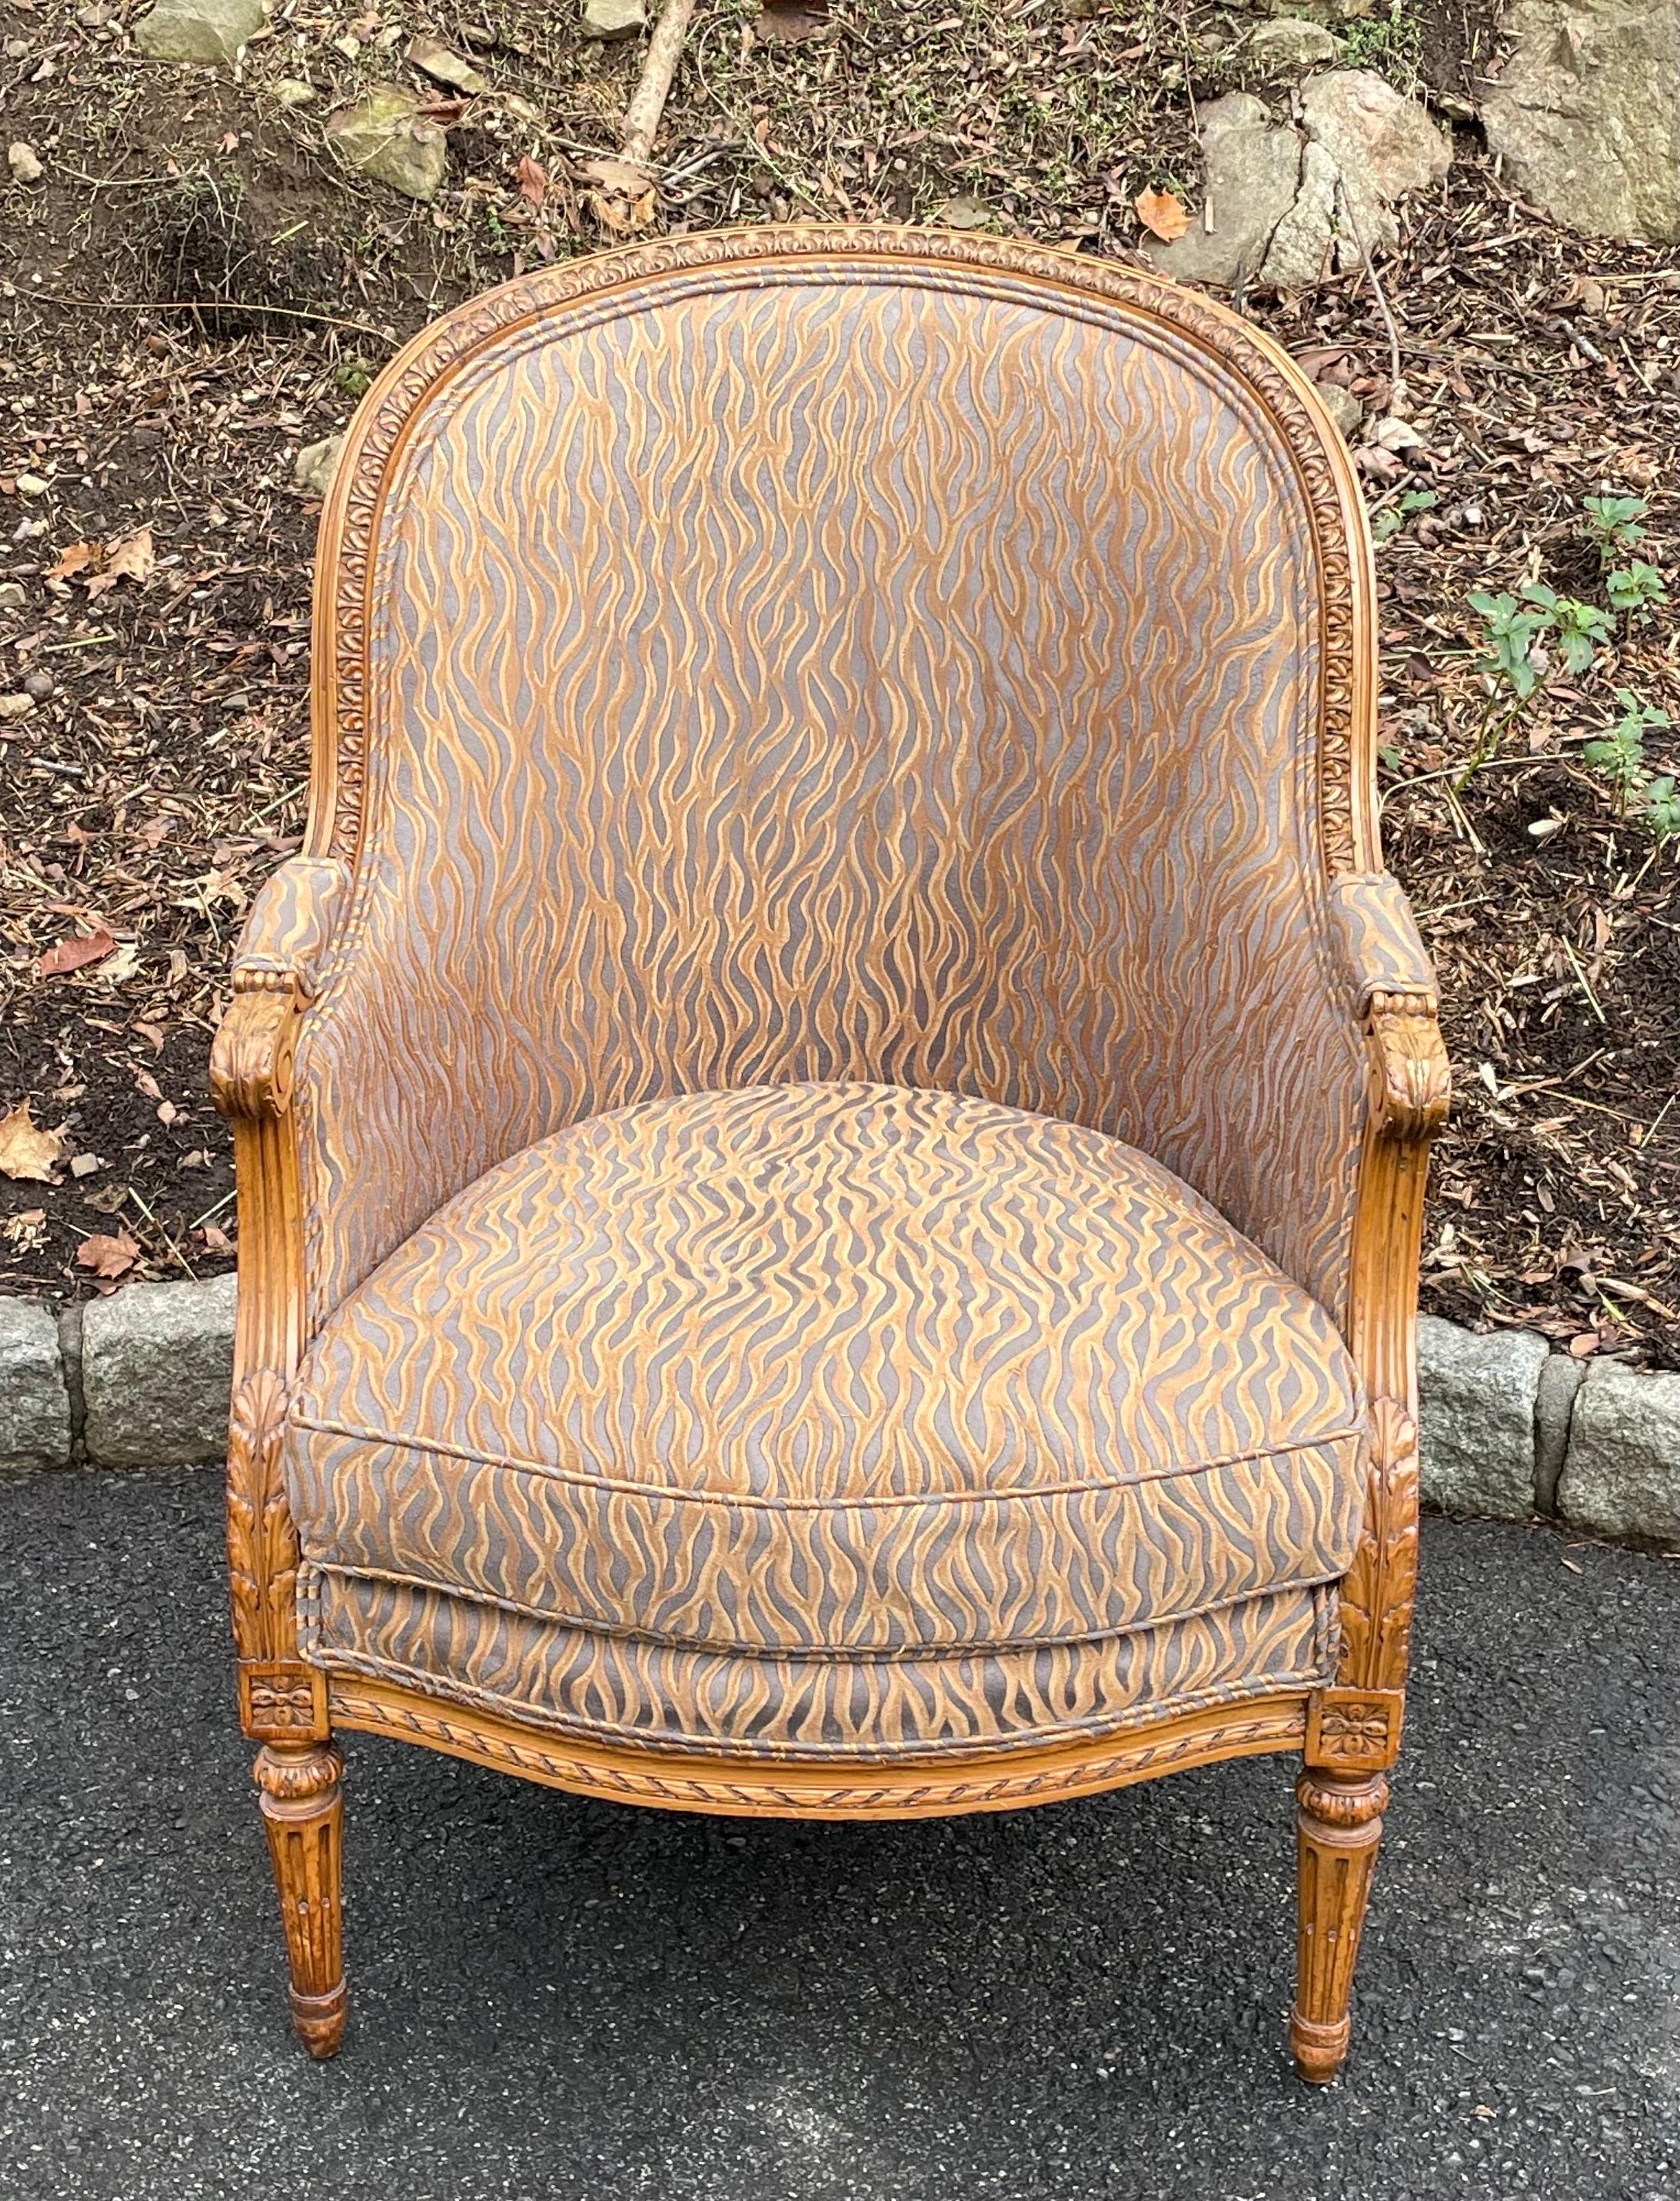 Louis XV style armchair with carved frame, upholstered in bronze flame patterned fabric.  No stains or rips in upholstery, minor wear on armrests, please see photos.